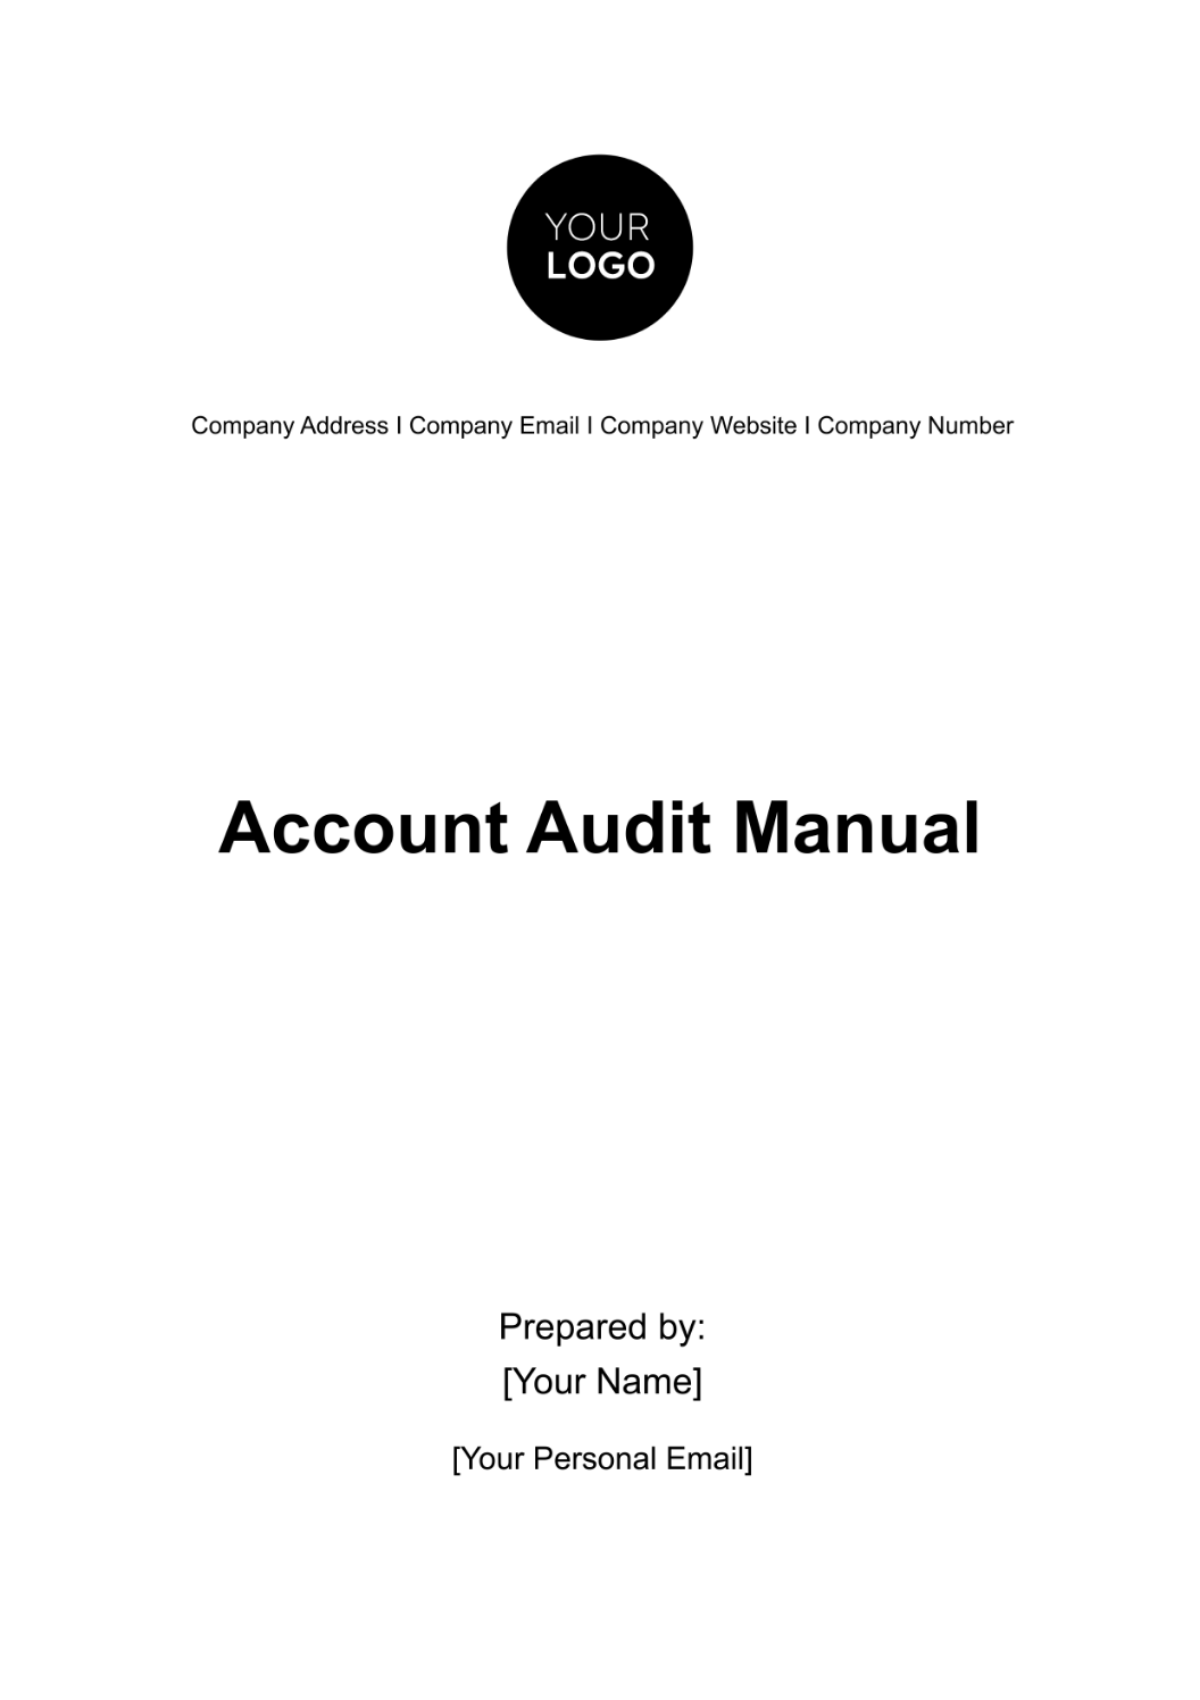 Free Account Audit Manual Template